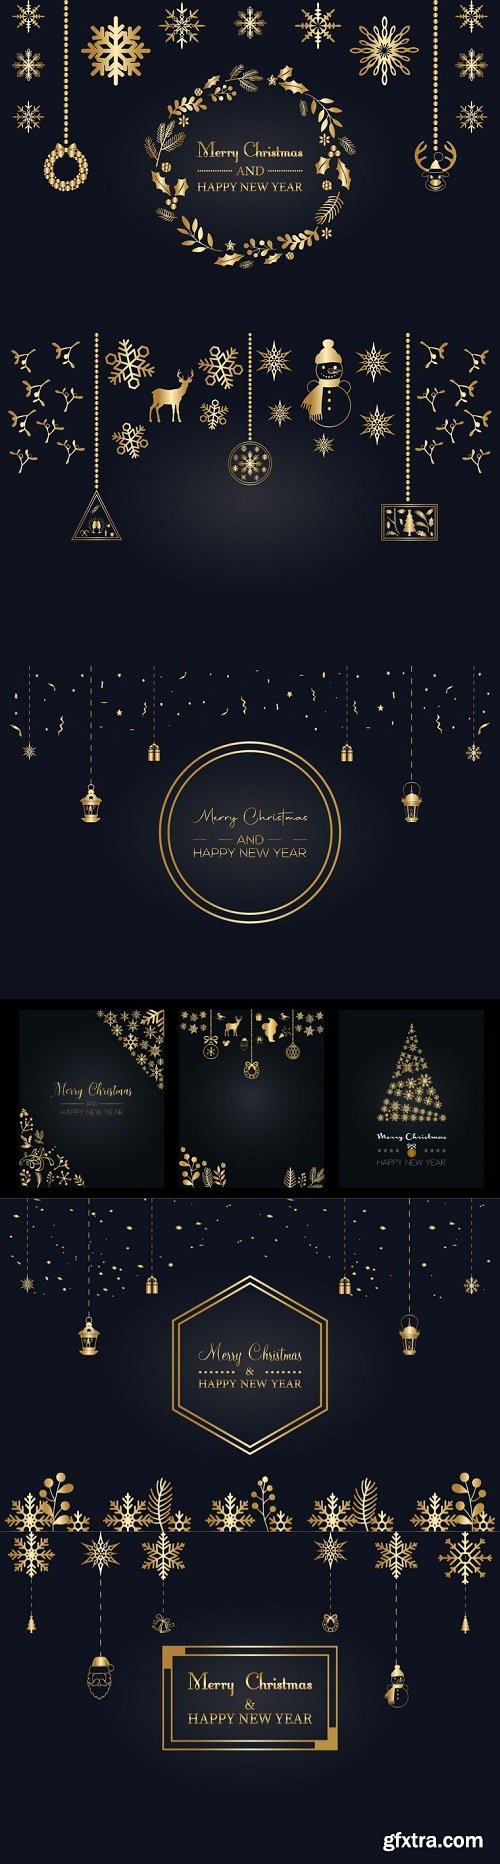 Merry christmas and happy new year luxury design, posters, website, banner, vector illustration